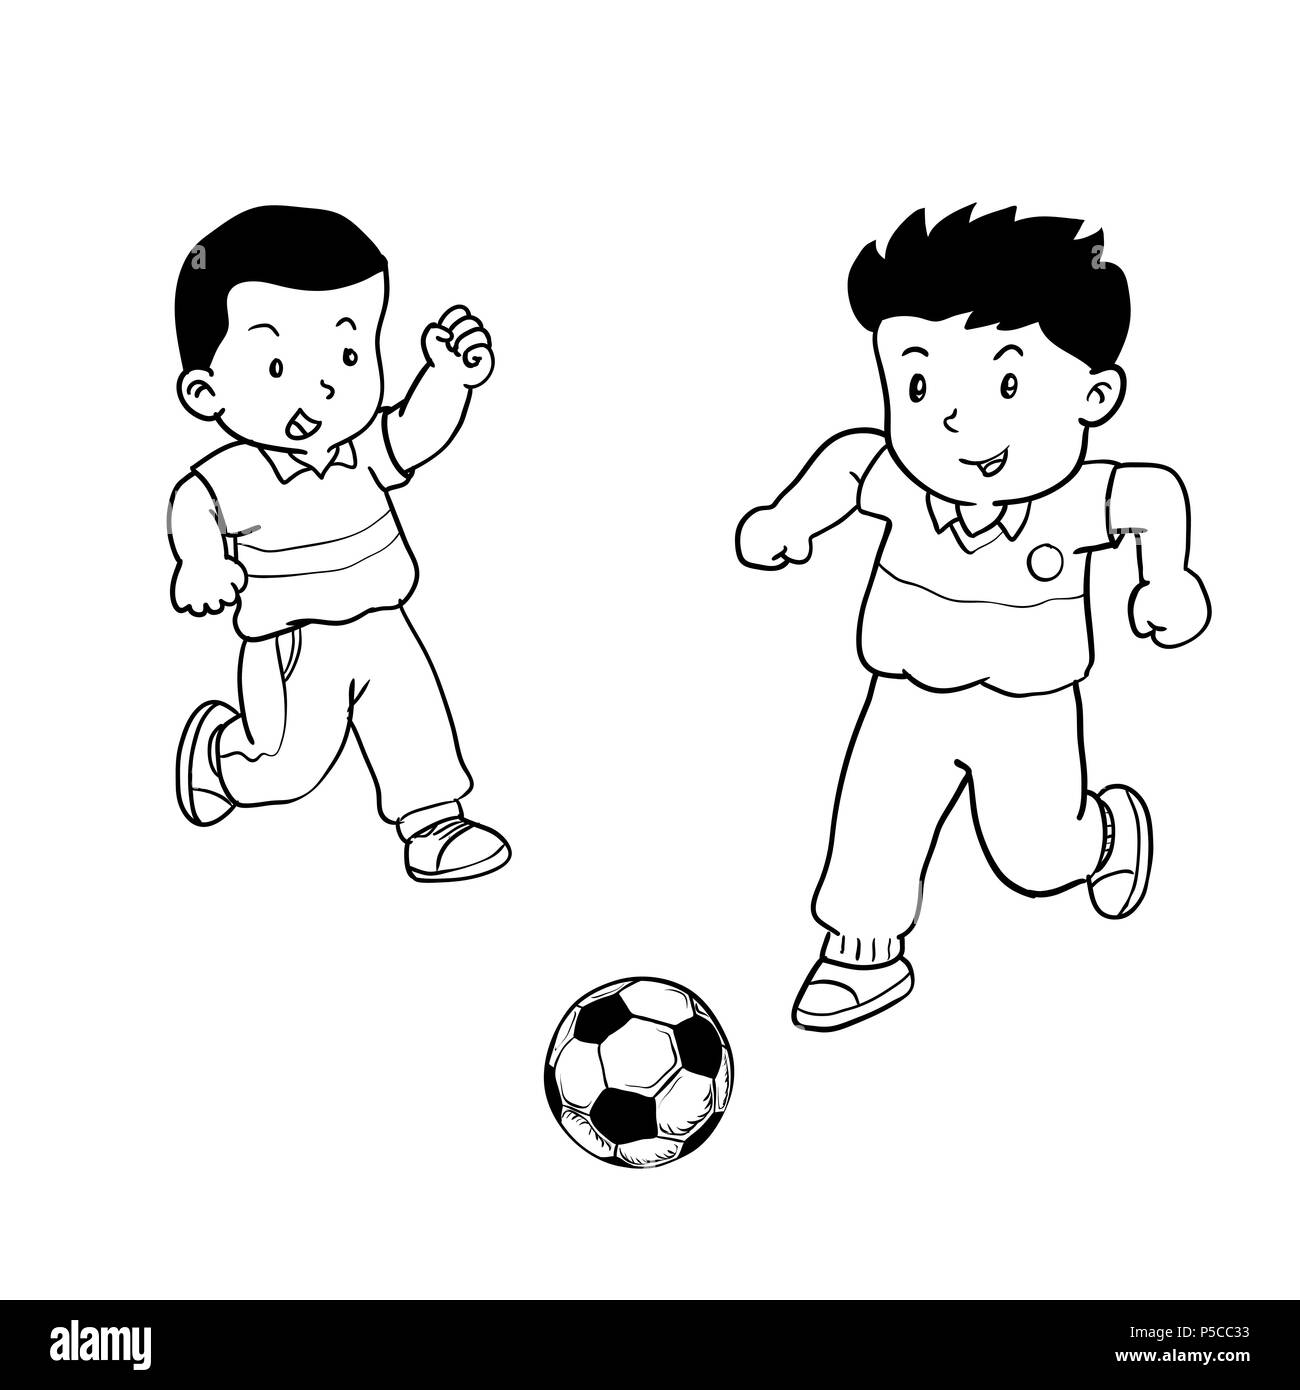 Hand drawn Boys playing Soccer, Kids playing Soccer, Isolated on white background. Black and White simple line Vector Illustration for Coloring Book - Stock Vector